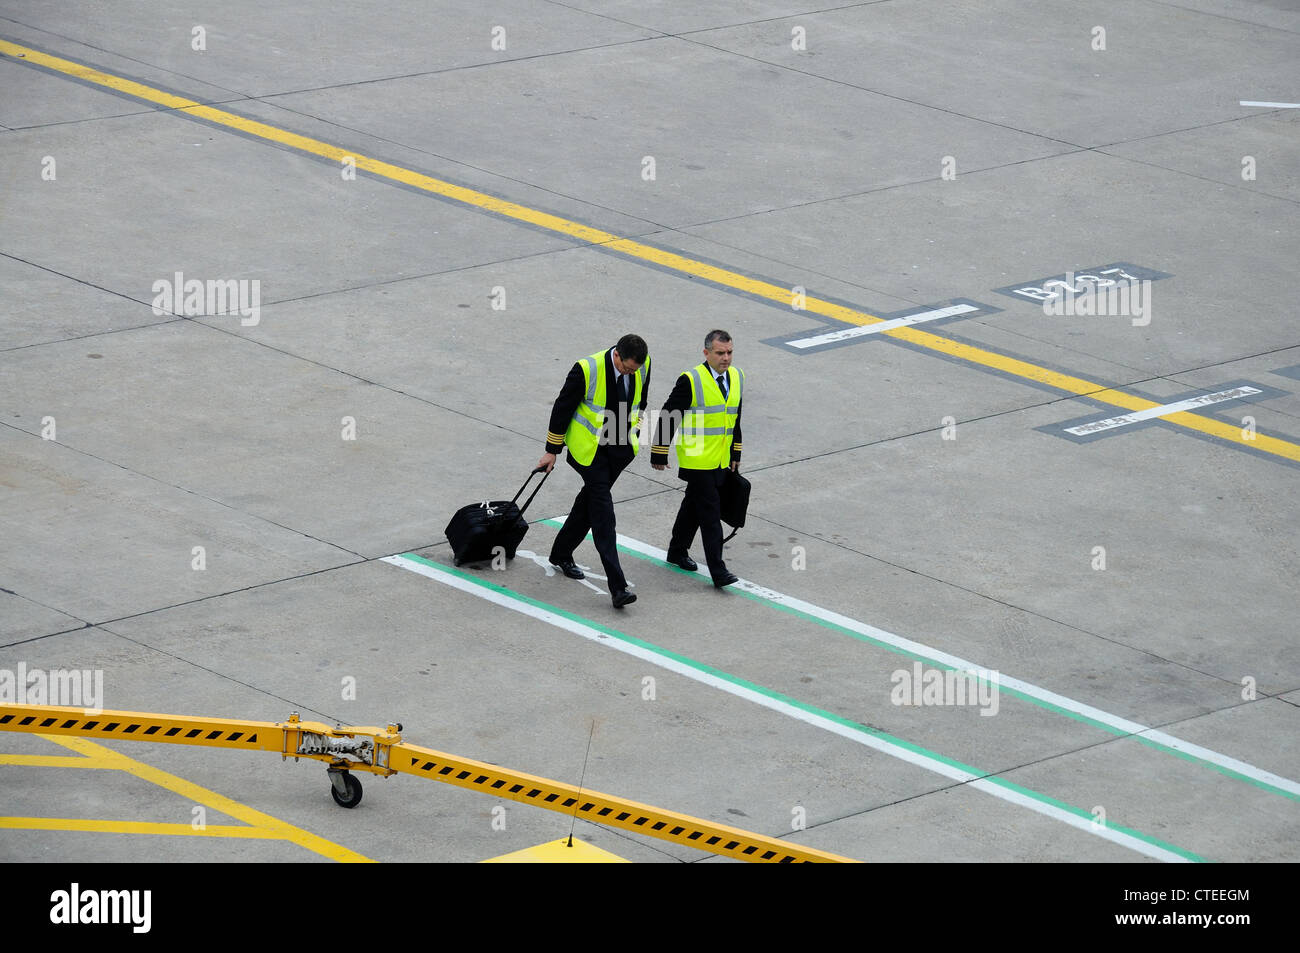 Pilot and co-pilot walking across apron with luggage, Birmingham Airport, West Midlands, England, UK, Western Europe. Stock Photo